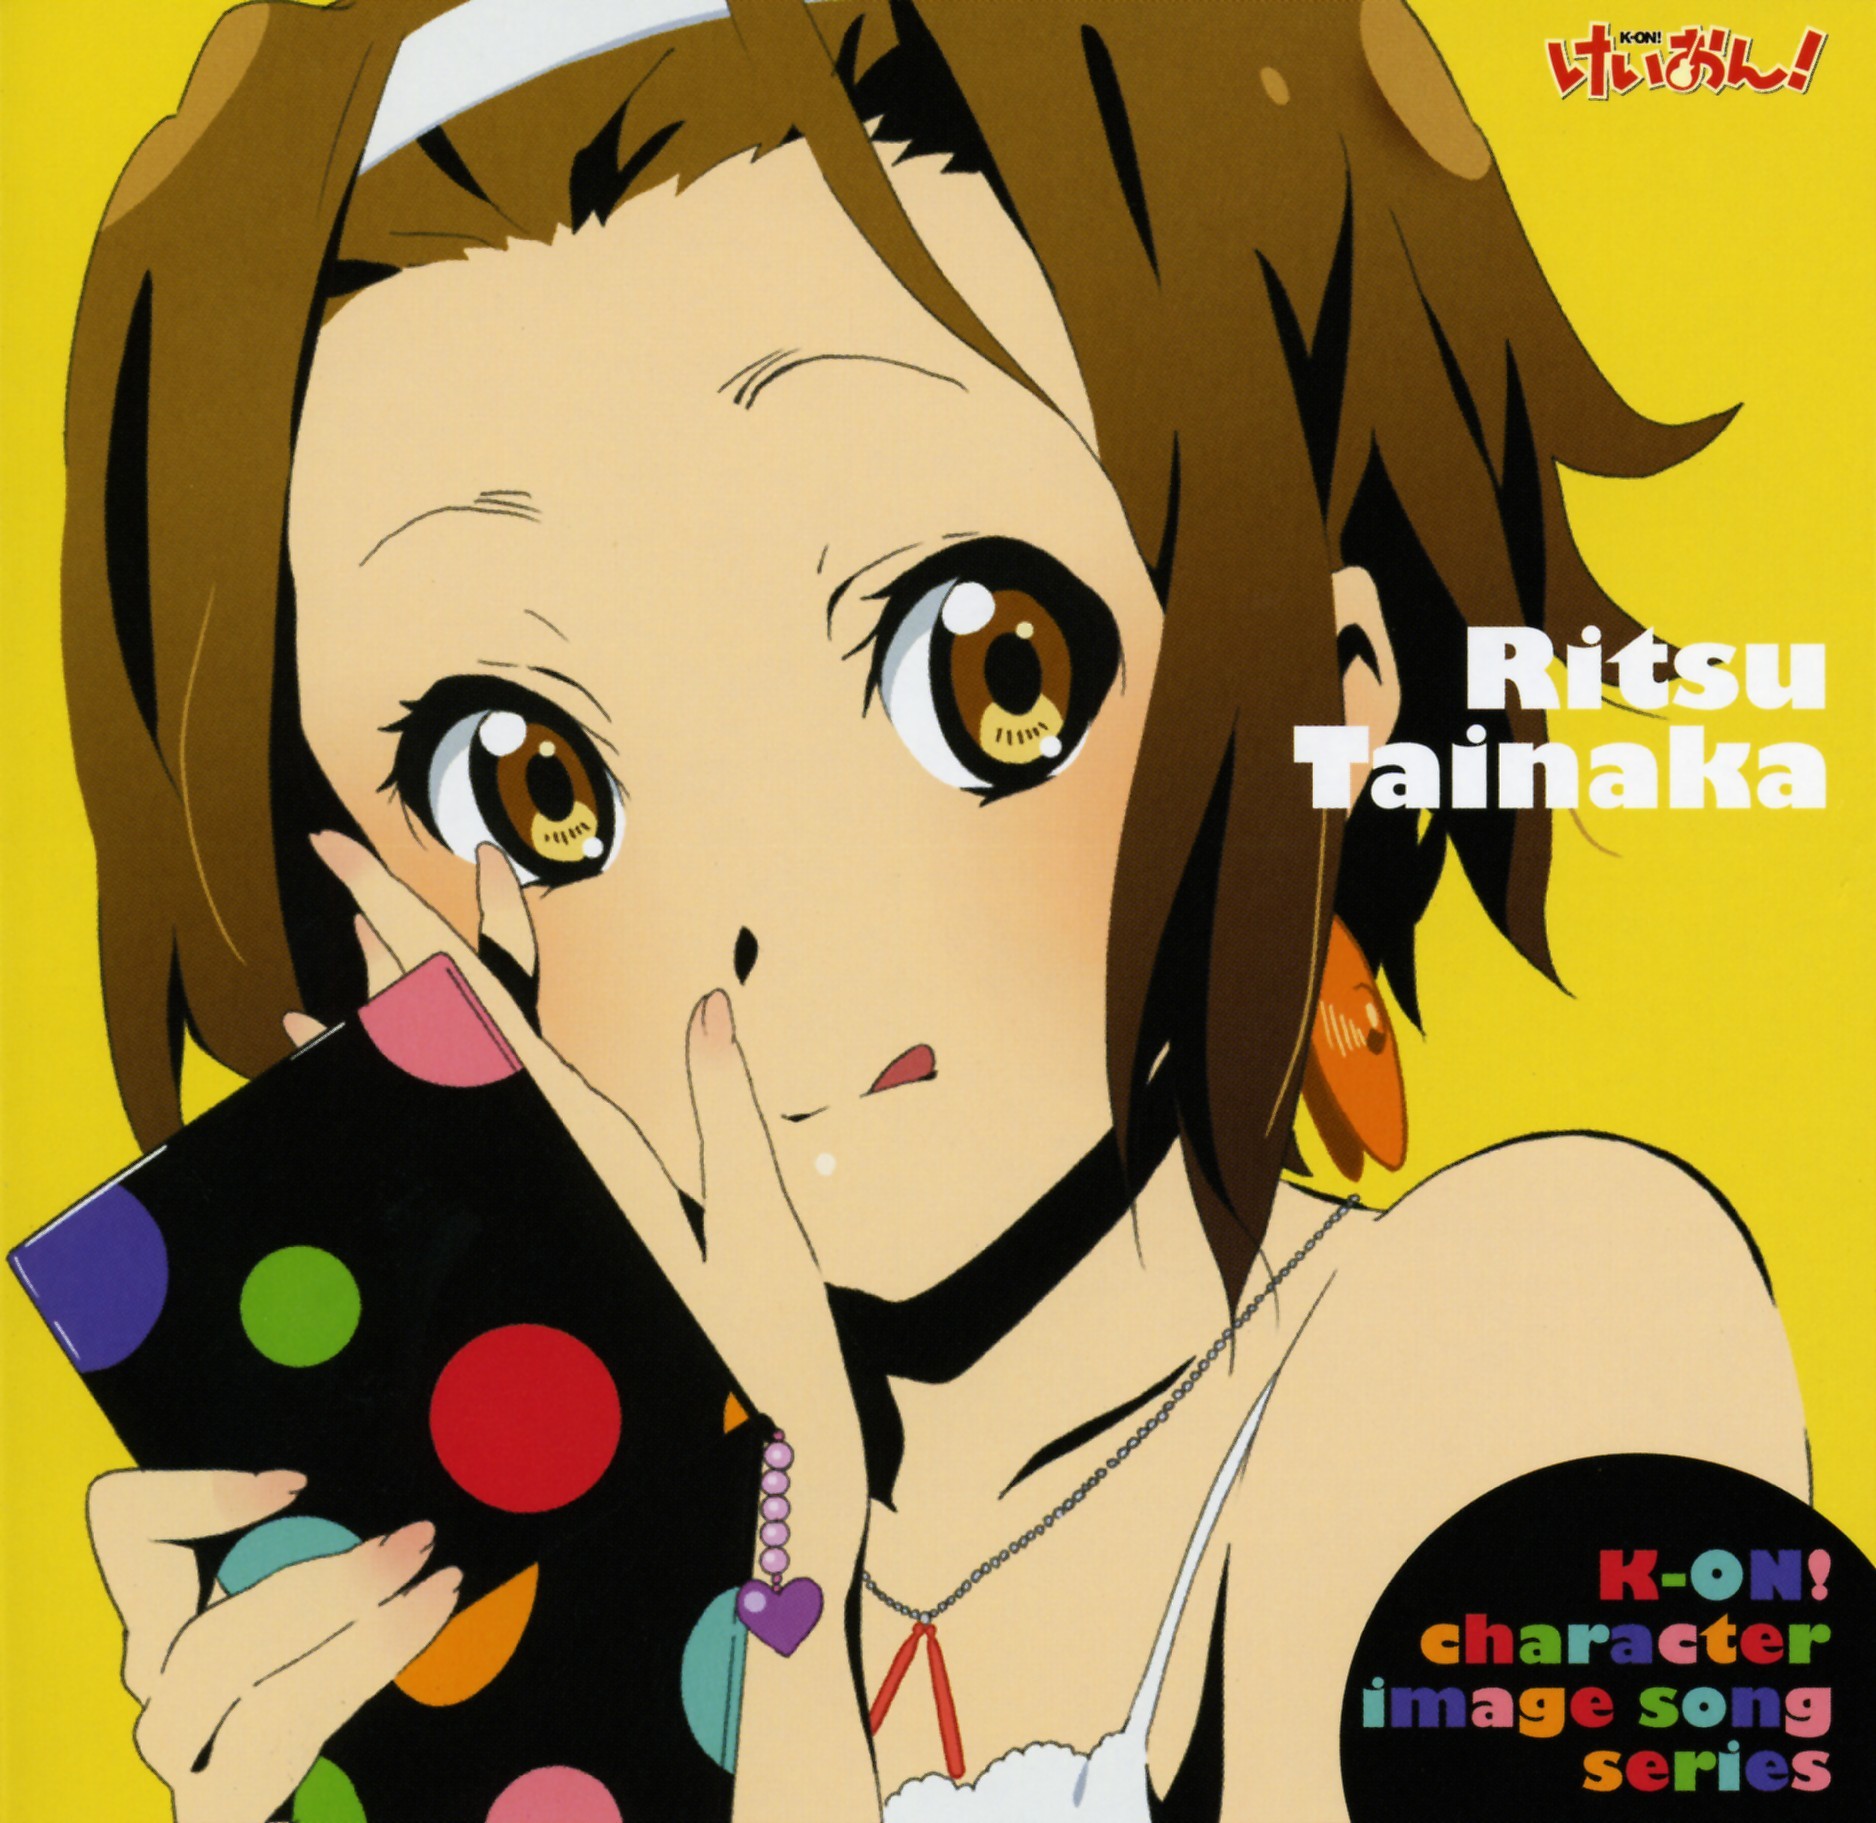 Character image Song Series k-on